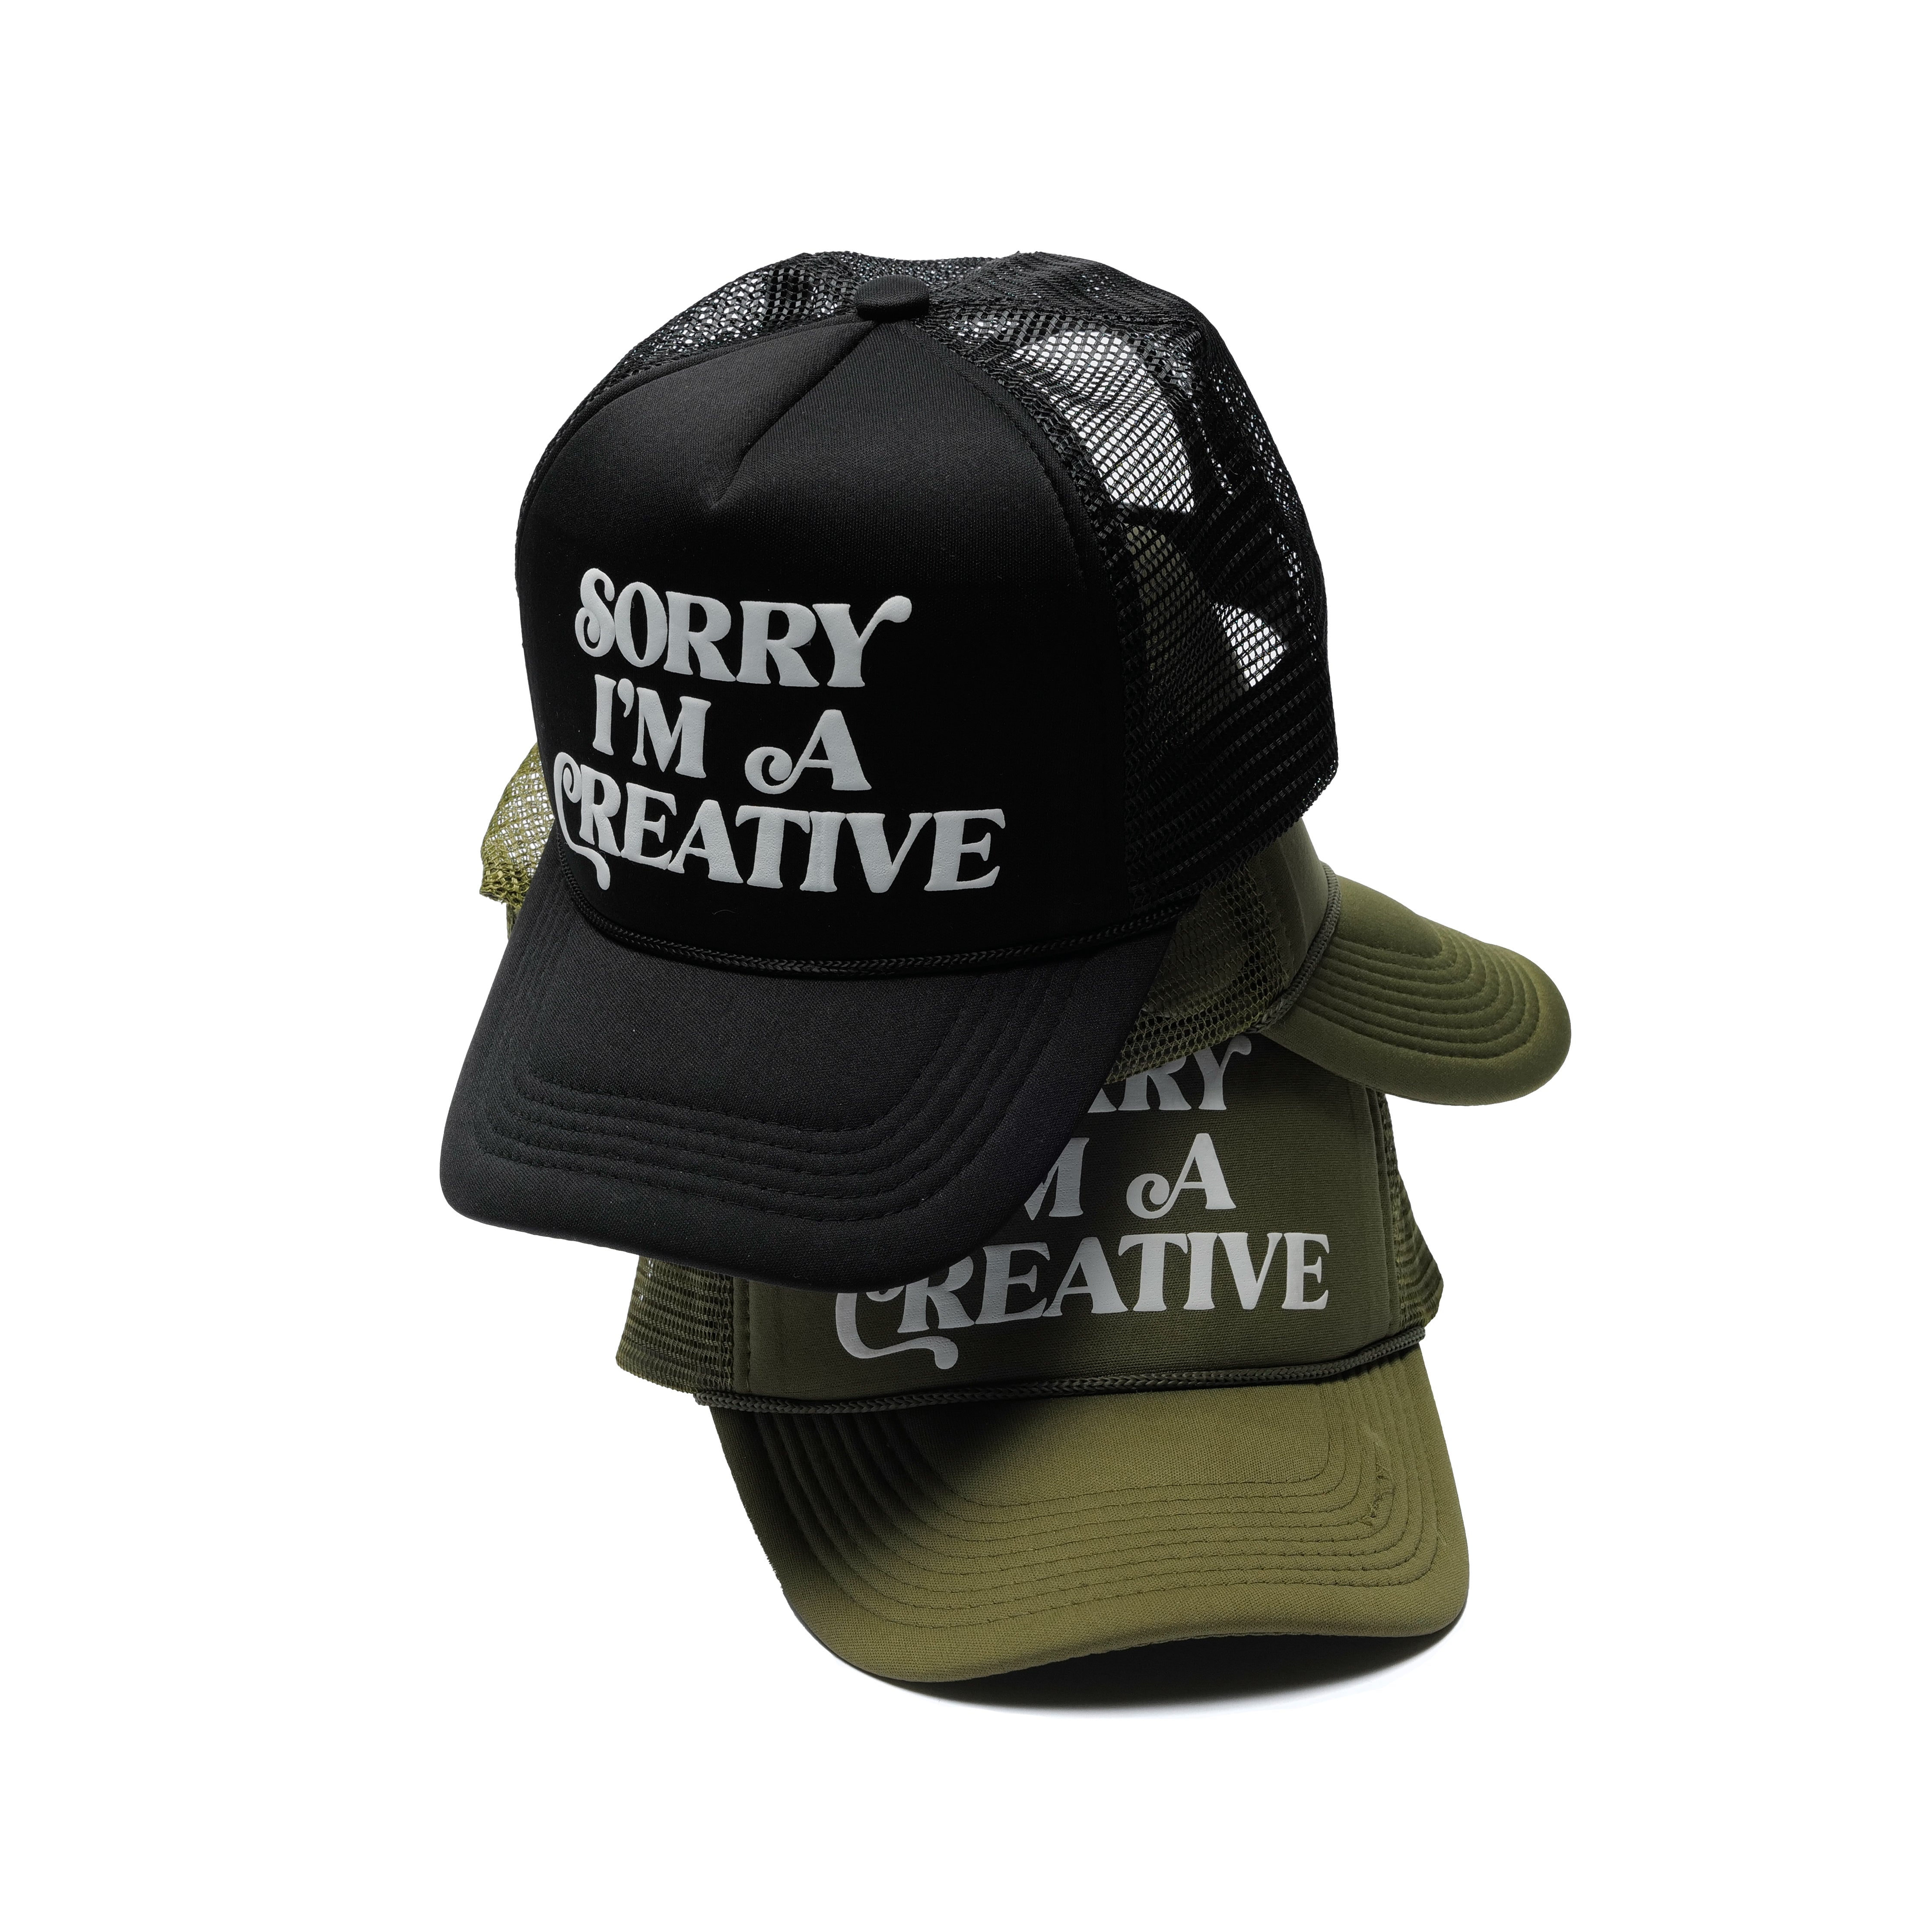 "Sorry I'm A Creative" Puff Print Trucker Hat (Black) - For The Crew Clothing Hat